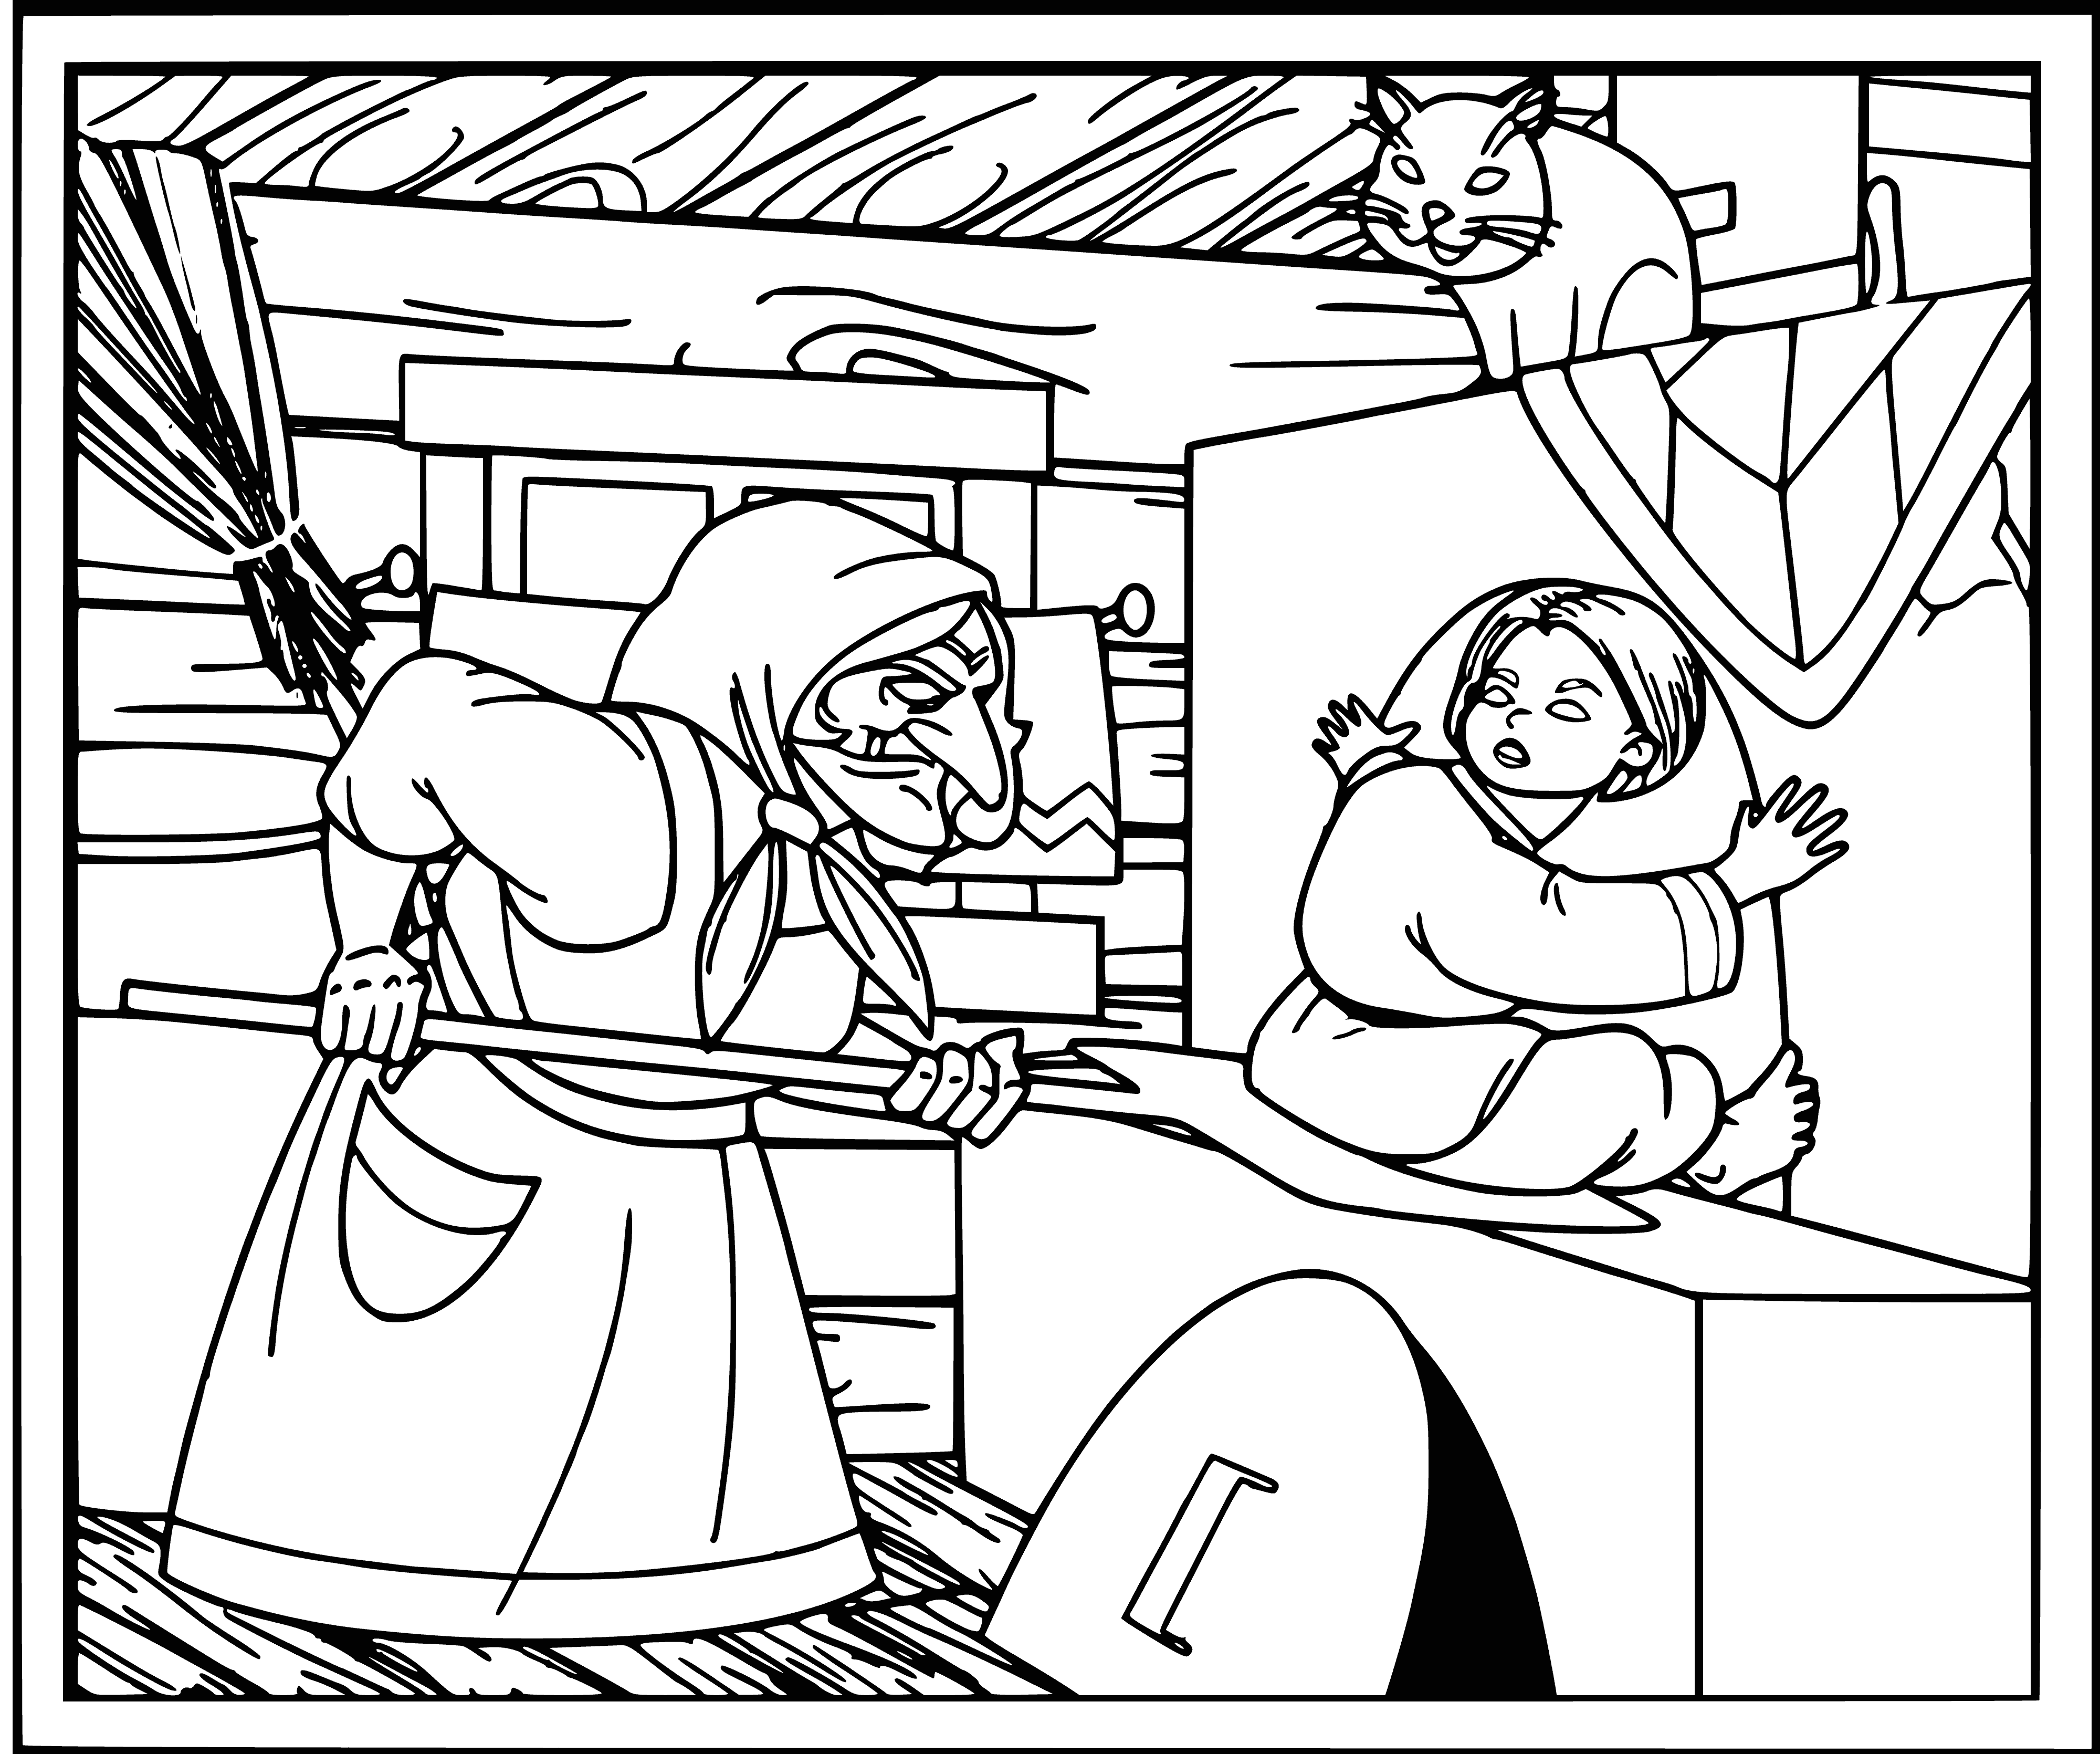 Resident coloring page